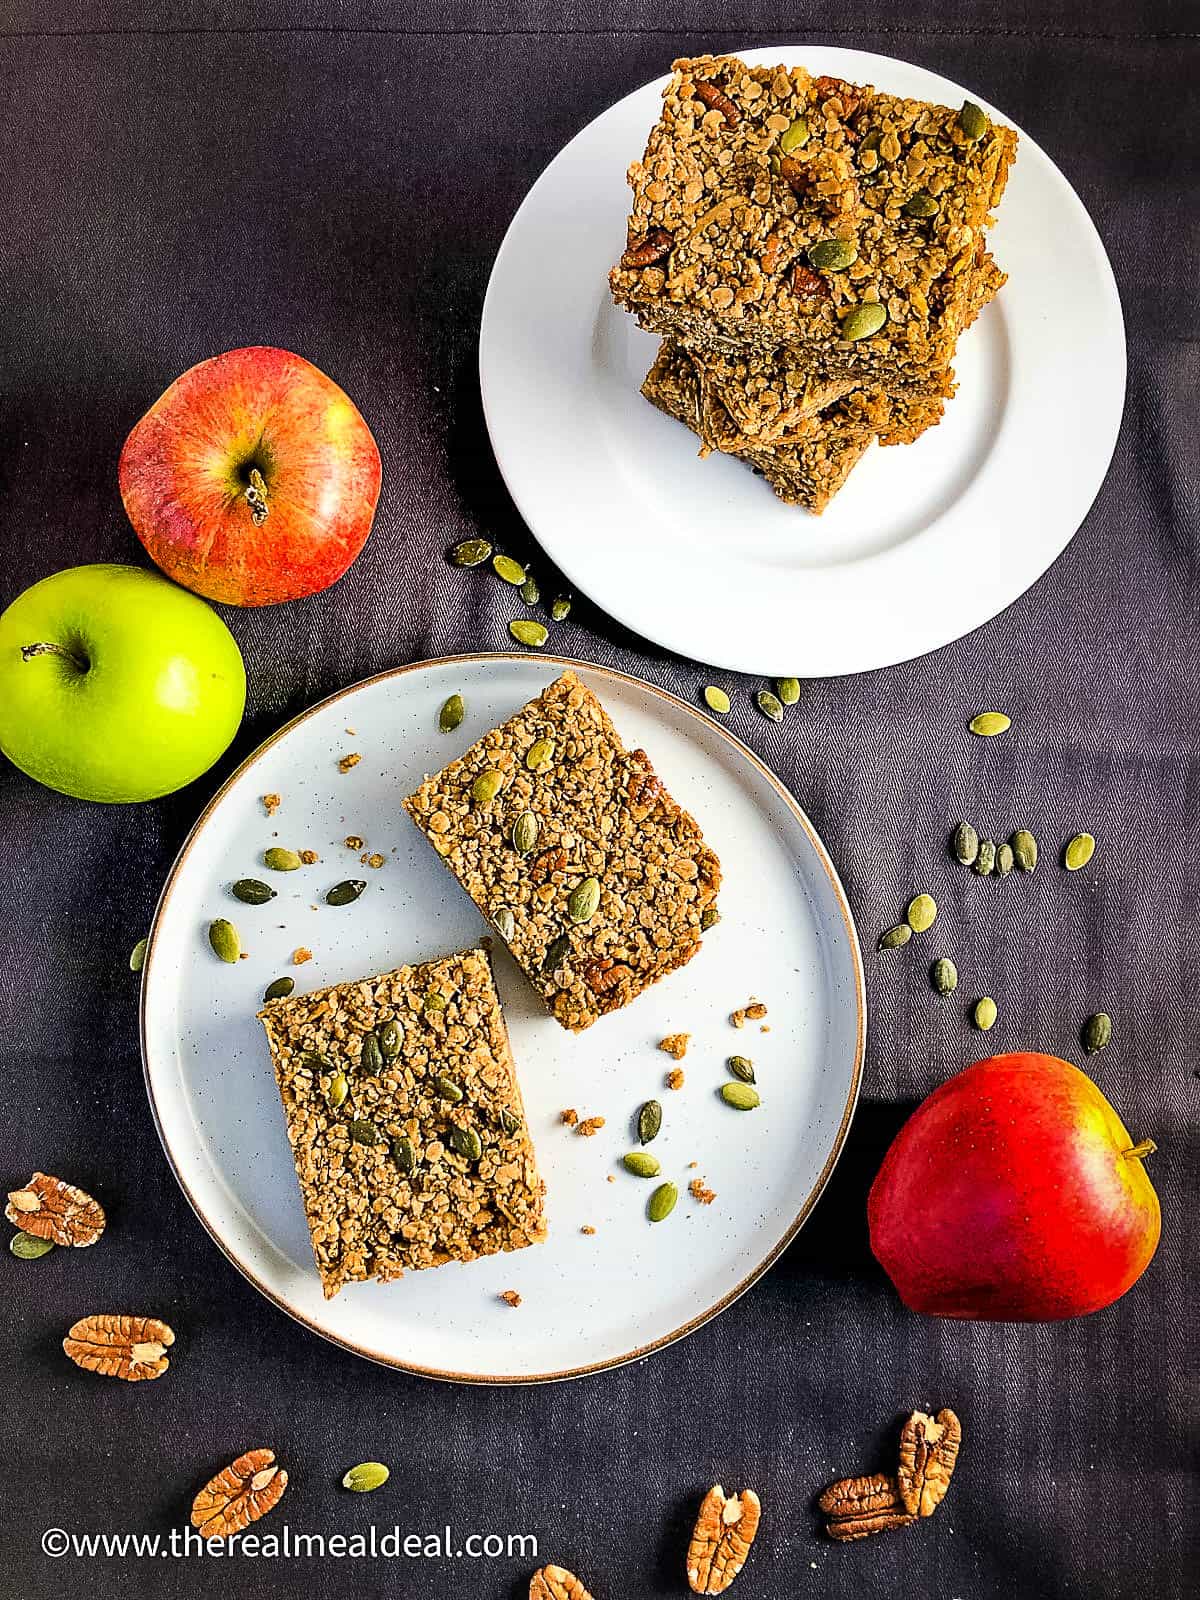 slices of vegan apple and maple syrup flapjack on plate surronded by whole apples and pecan nuts